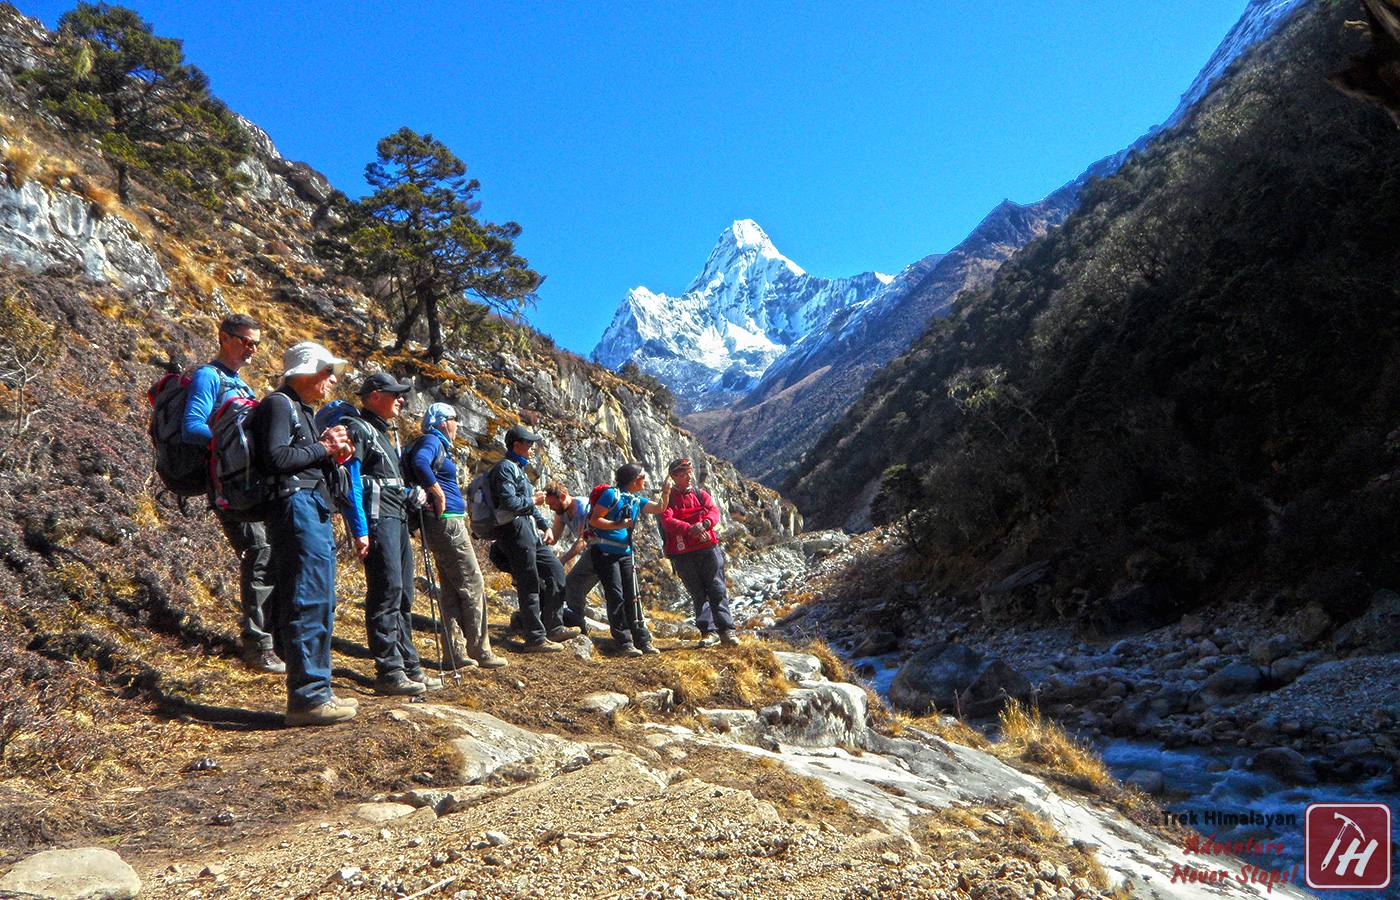 Students Tour In Nepal